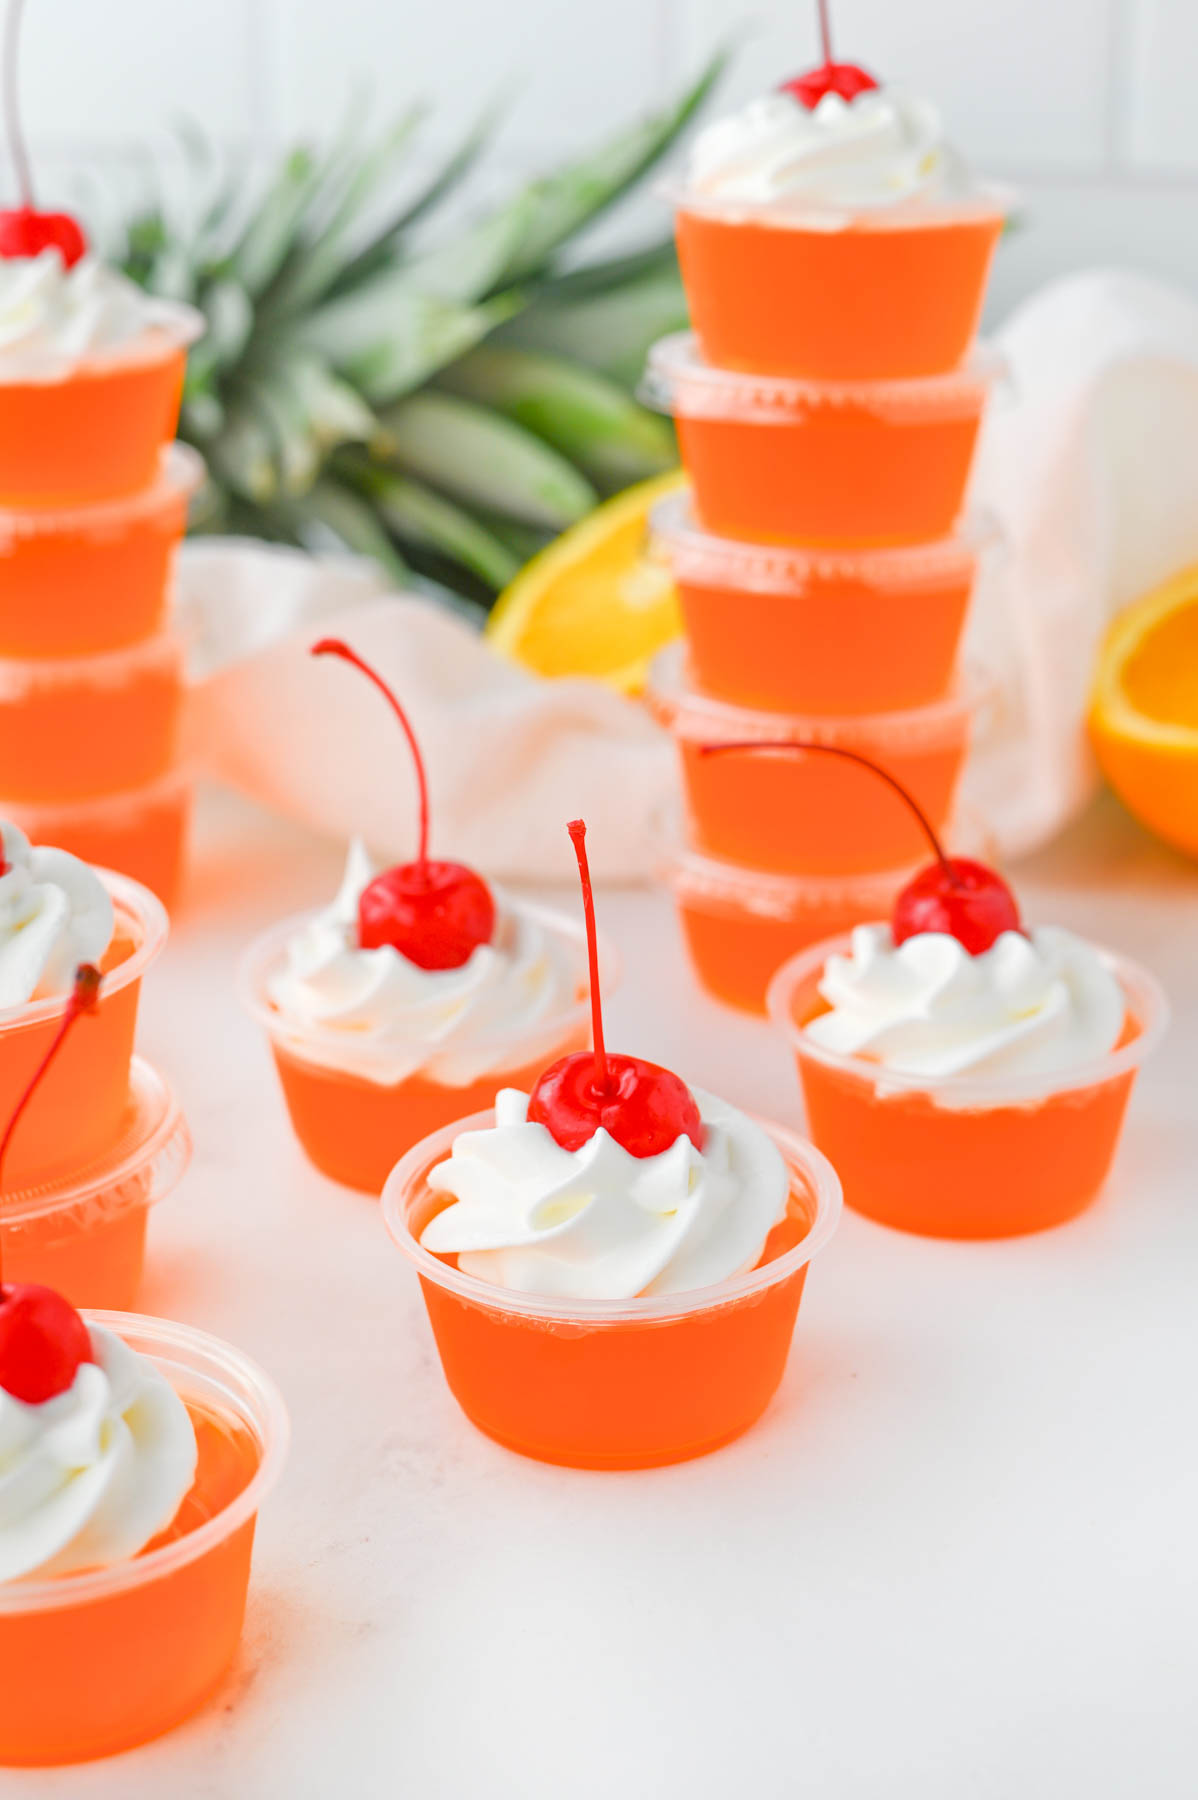 A group of bahama mama jello shot cups with whipped cream and cherries